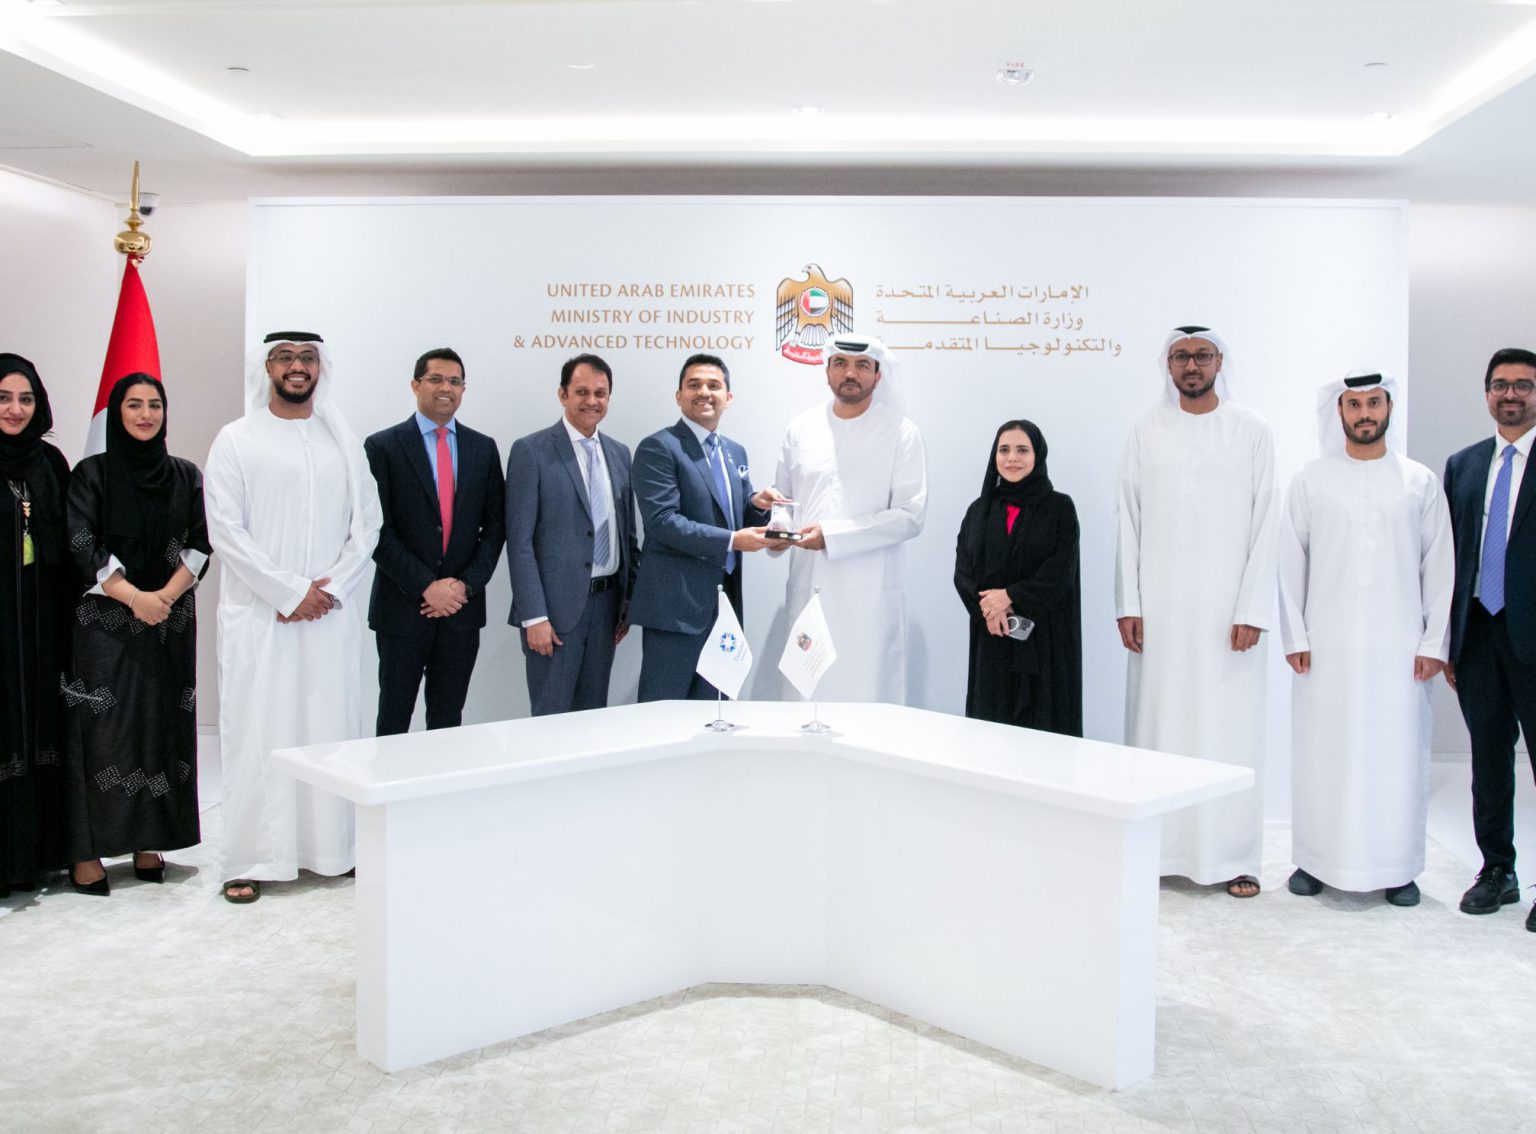 Ministry of Industry and Advanced Technology Teams Up with Burjeel Holdings for Priority Health Services to Employees, Families